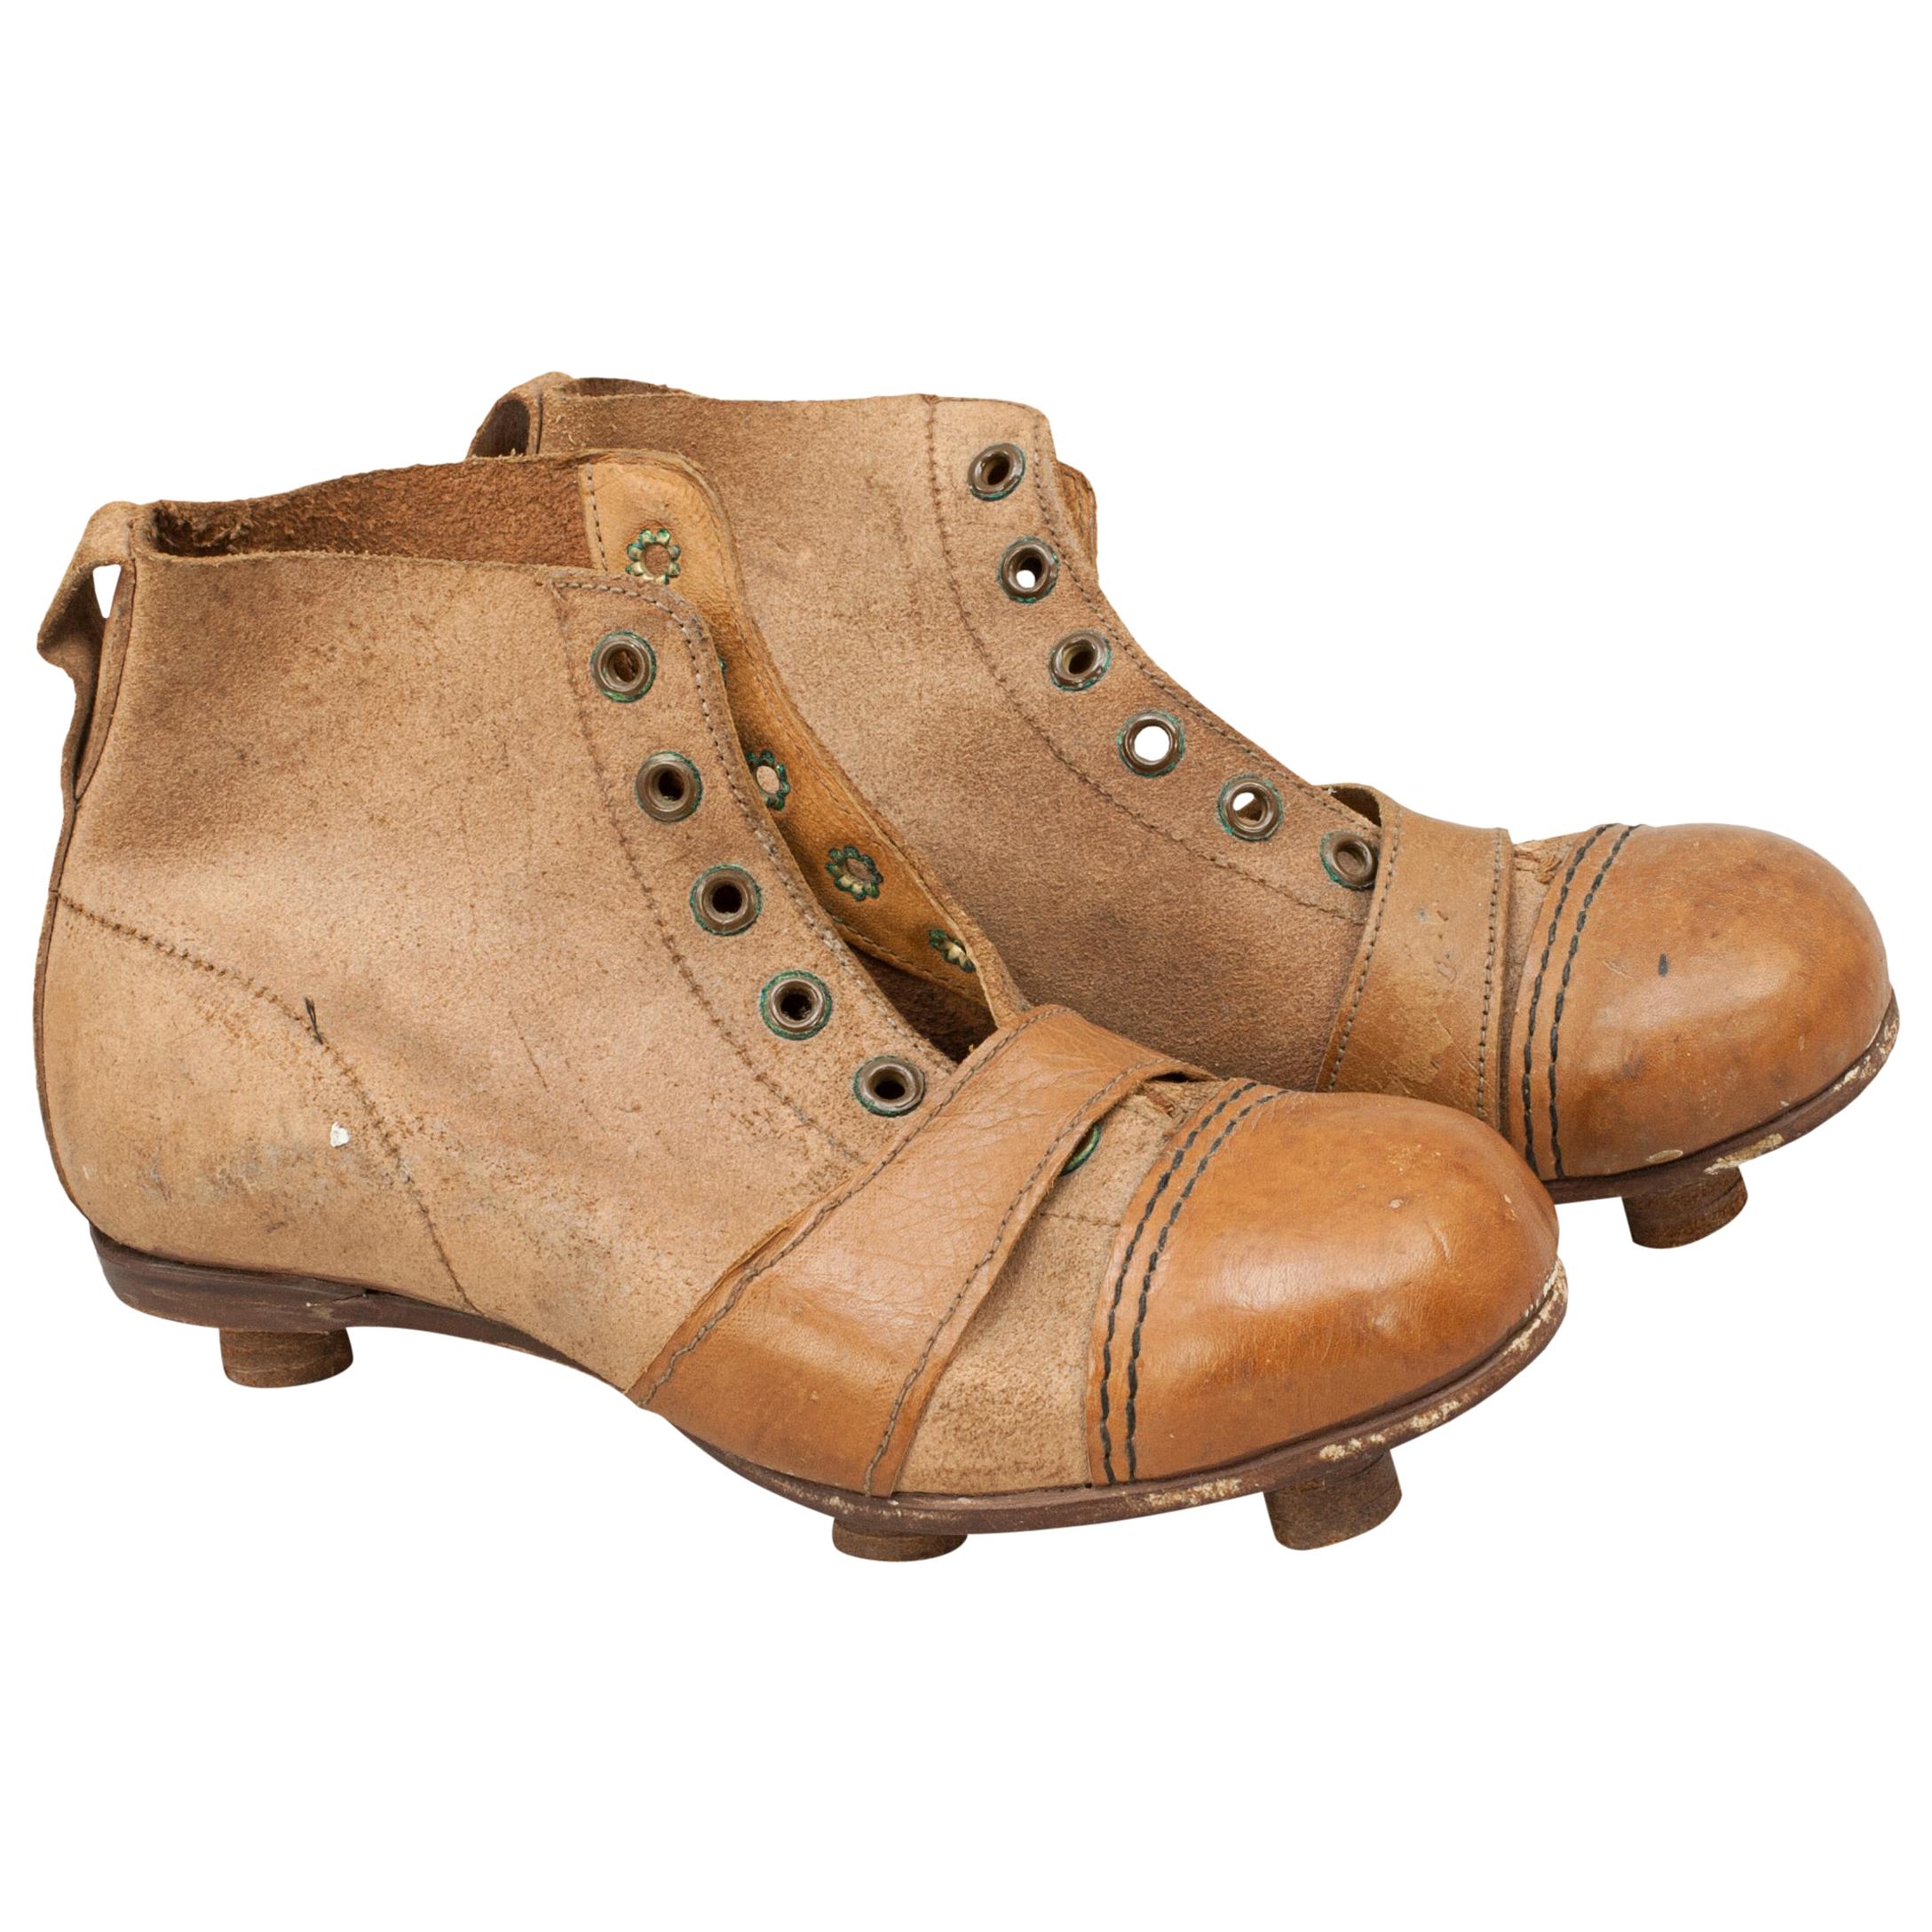 Vintage Leather Childs Football Boots 